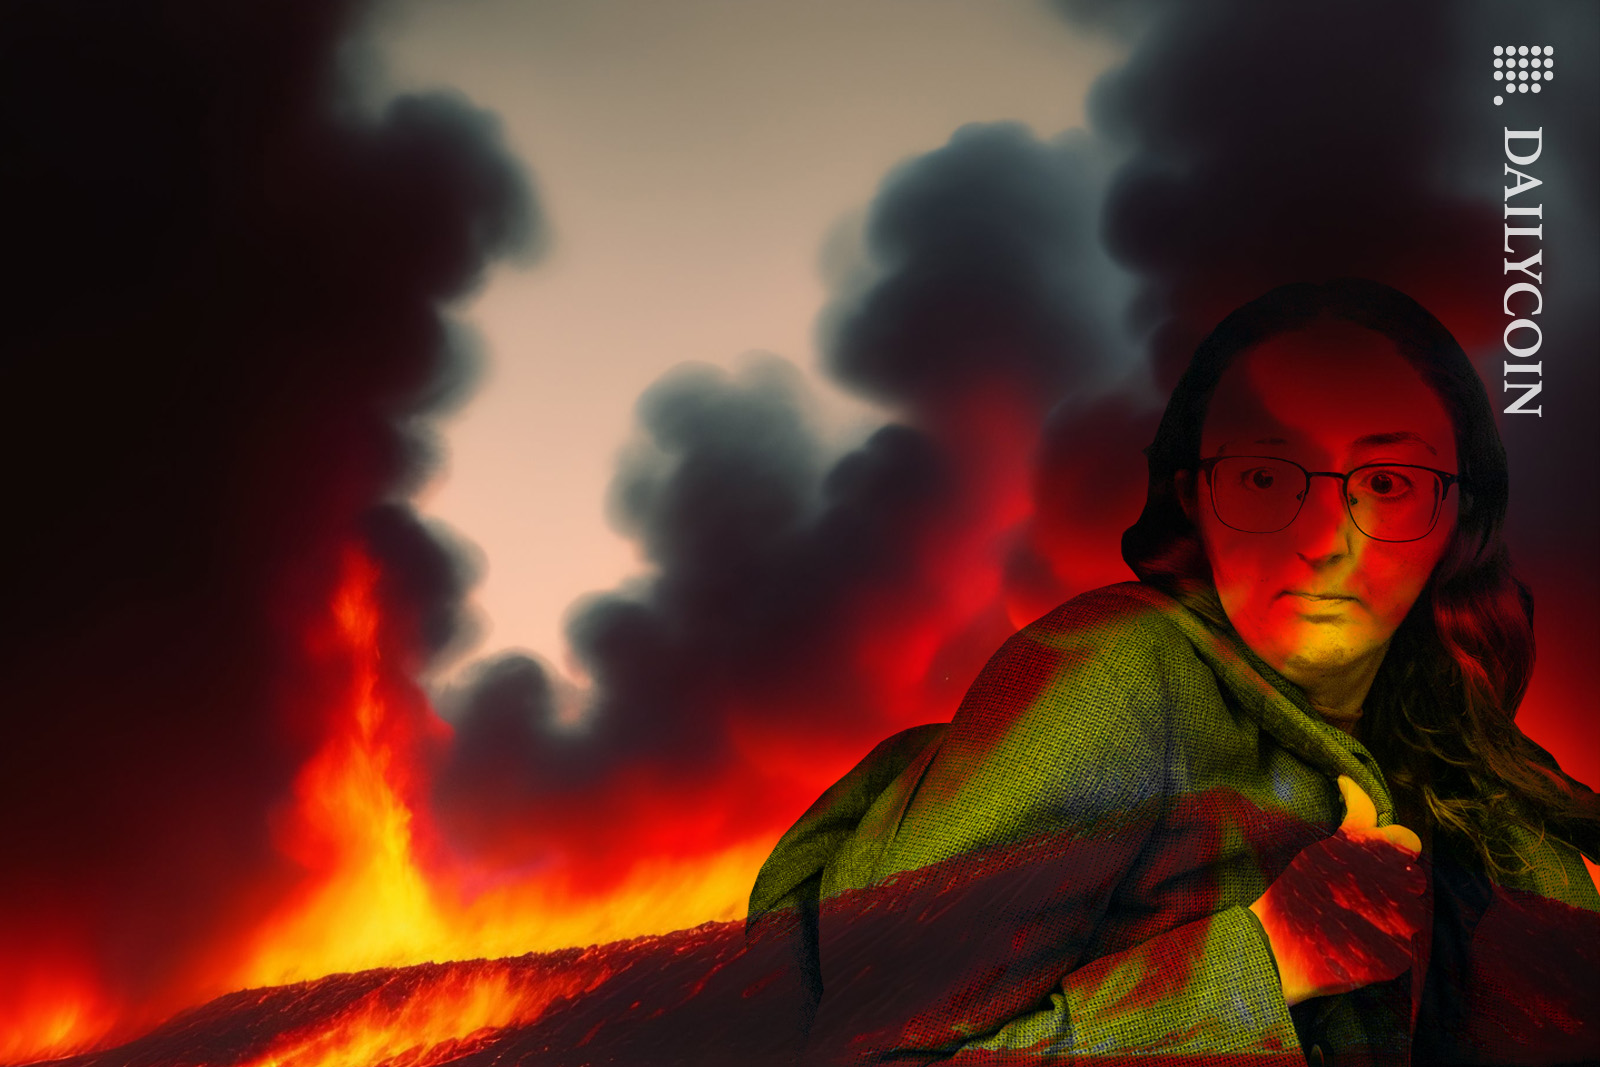 Caroline Ellison looking scared whilest burning in flames.